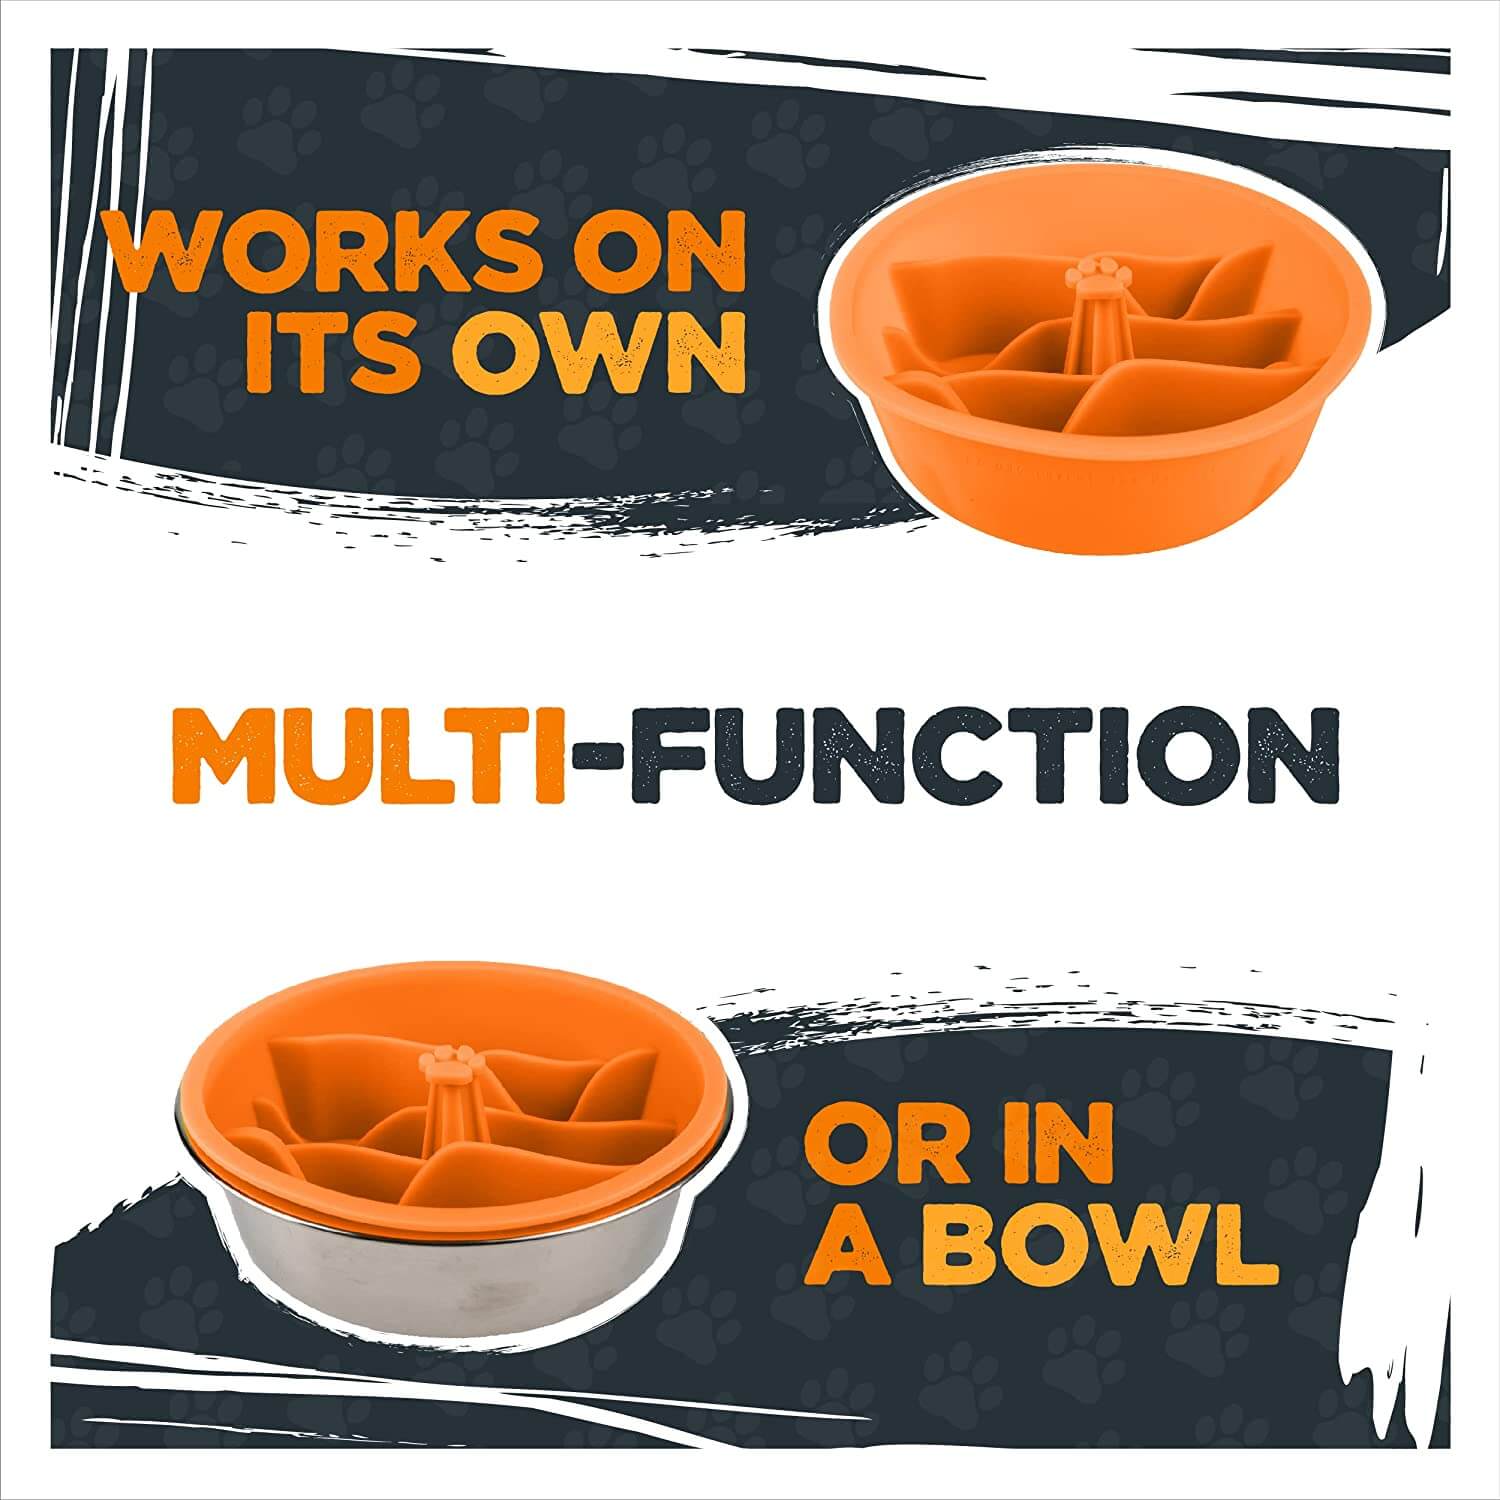 Mighty Paw Slow Feed Dog Bowl Insert